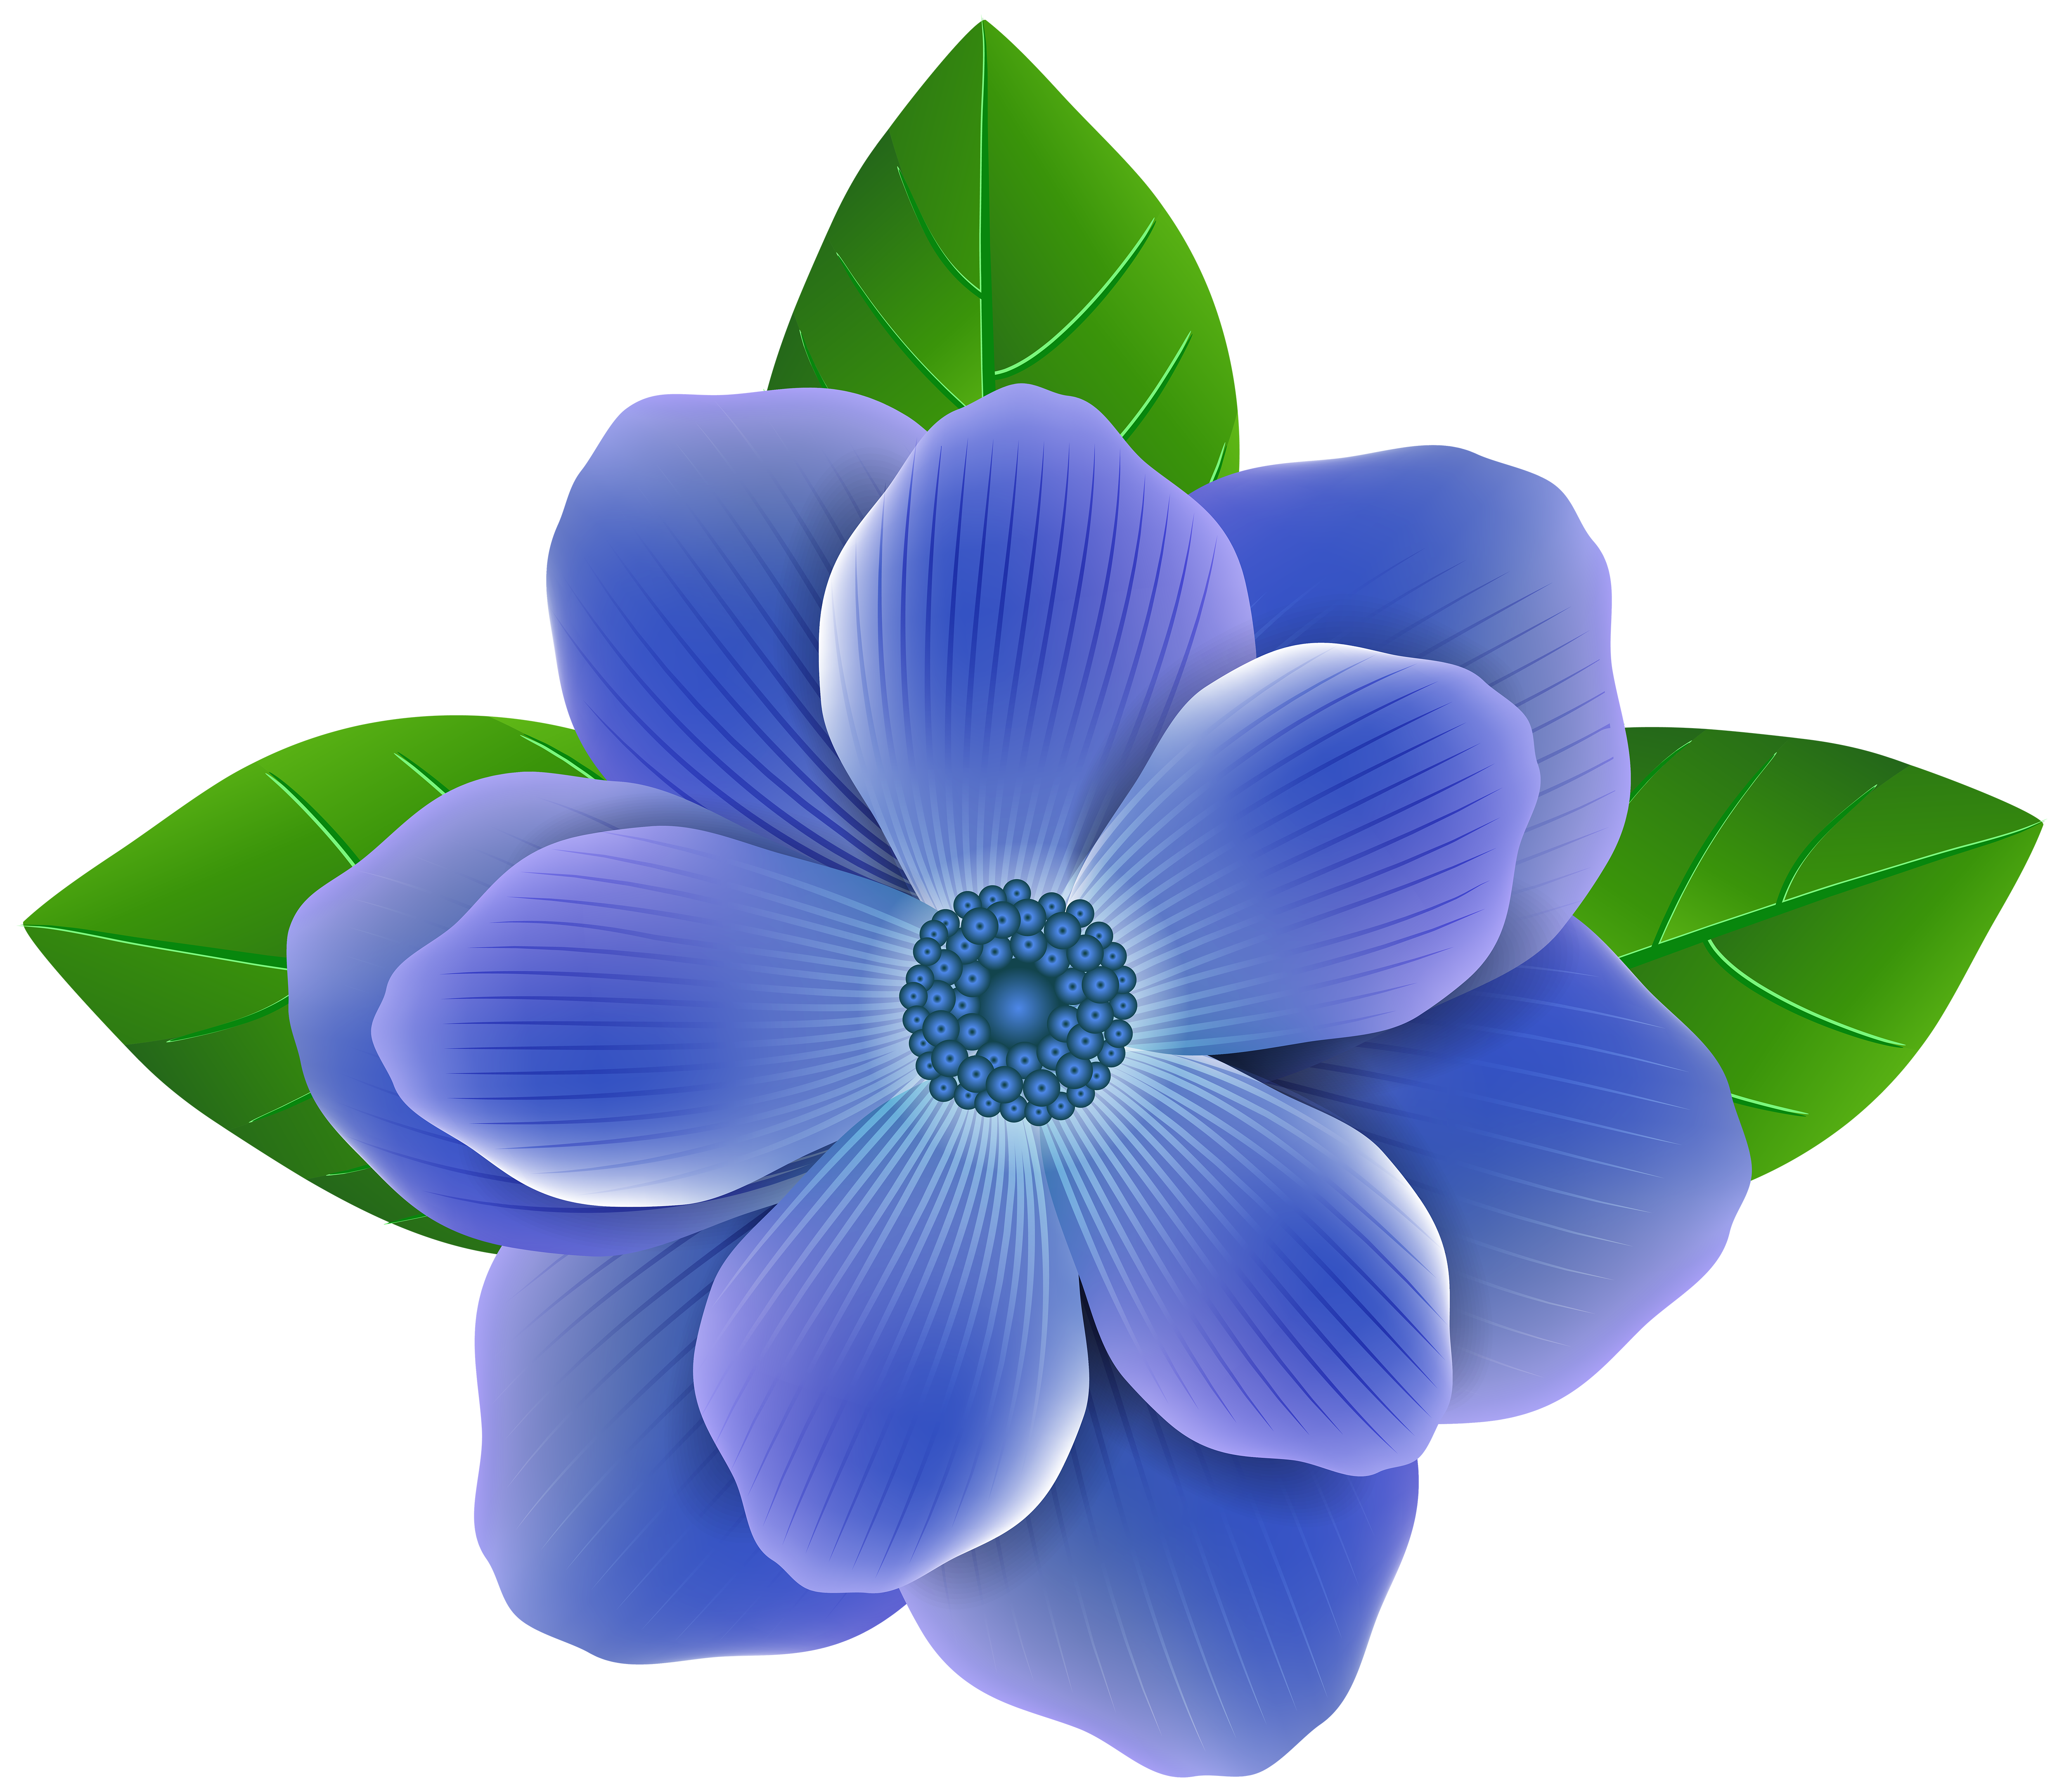 Blue Flower PNG Clip Art Image | Gallery Yopriceville - High ...